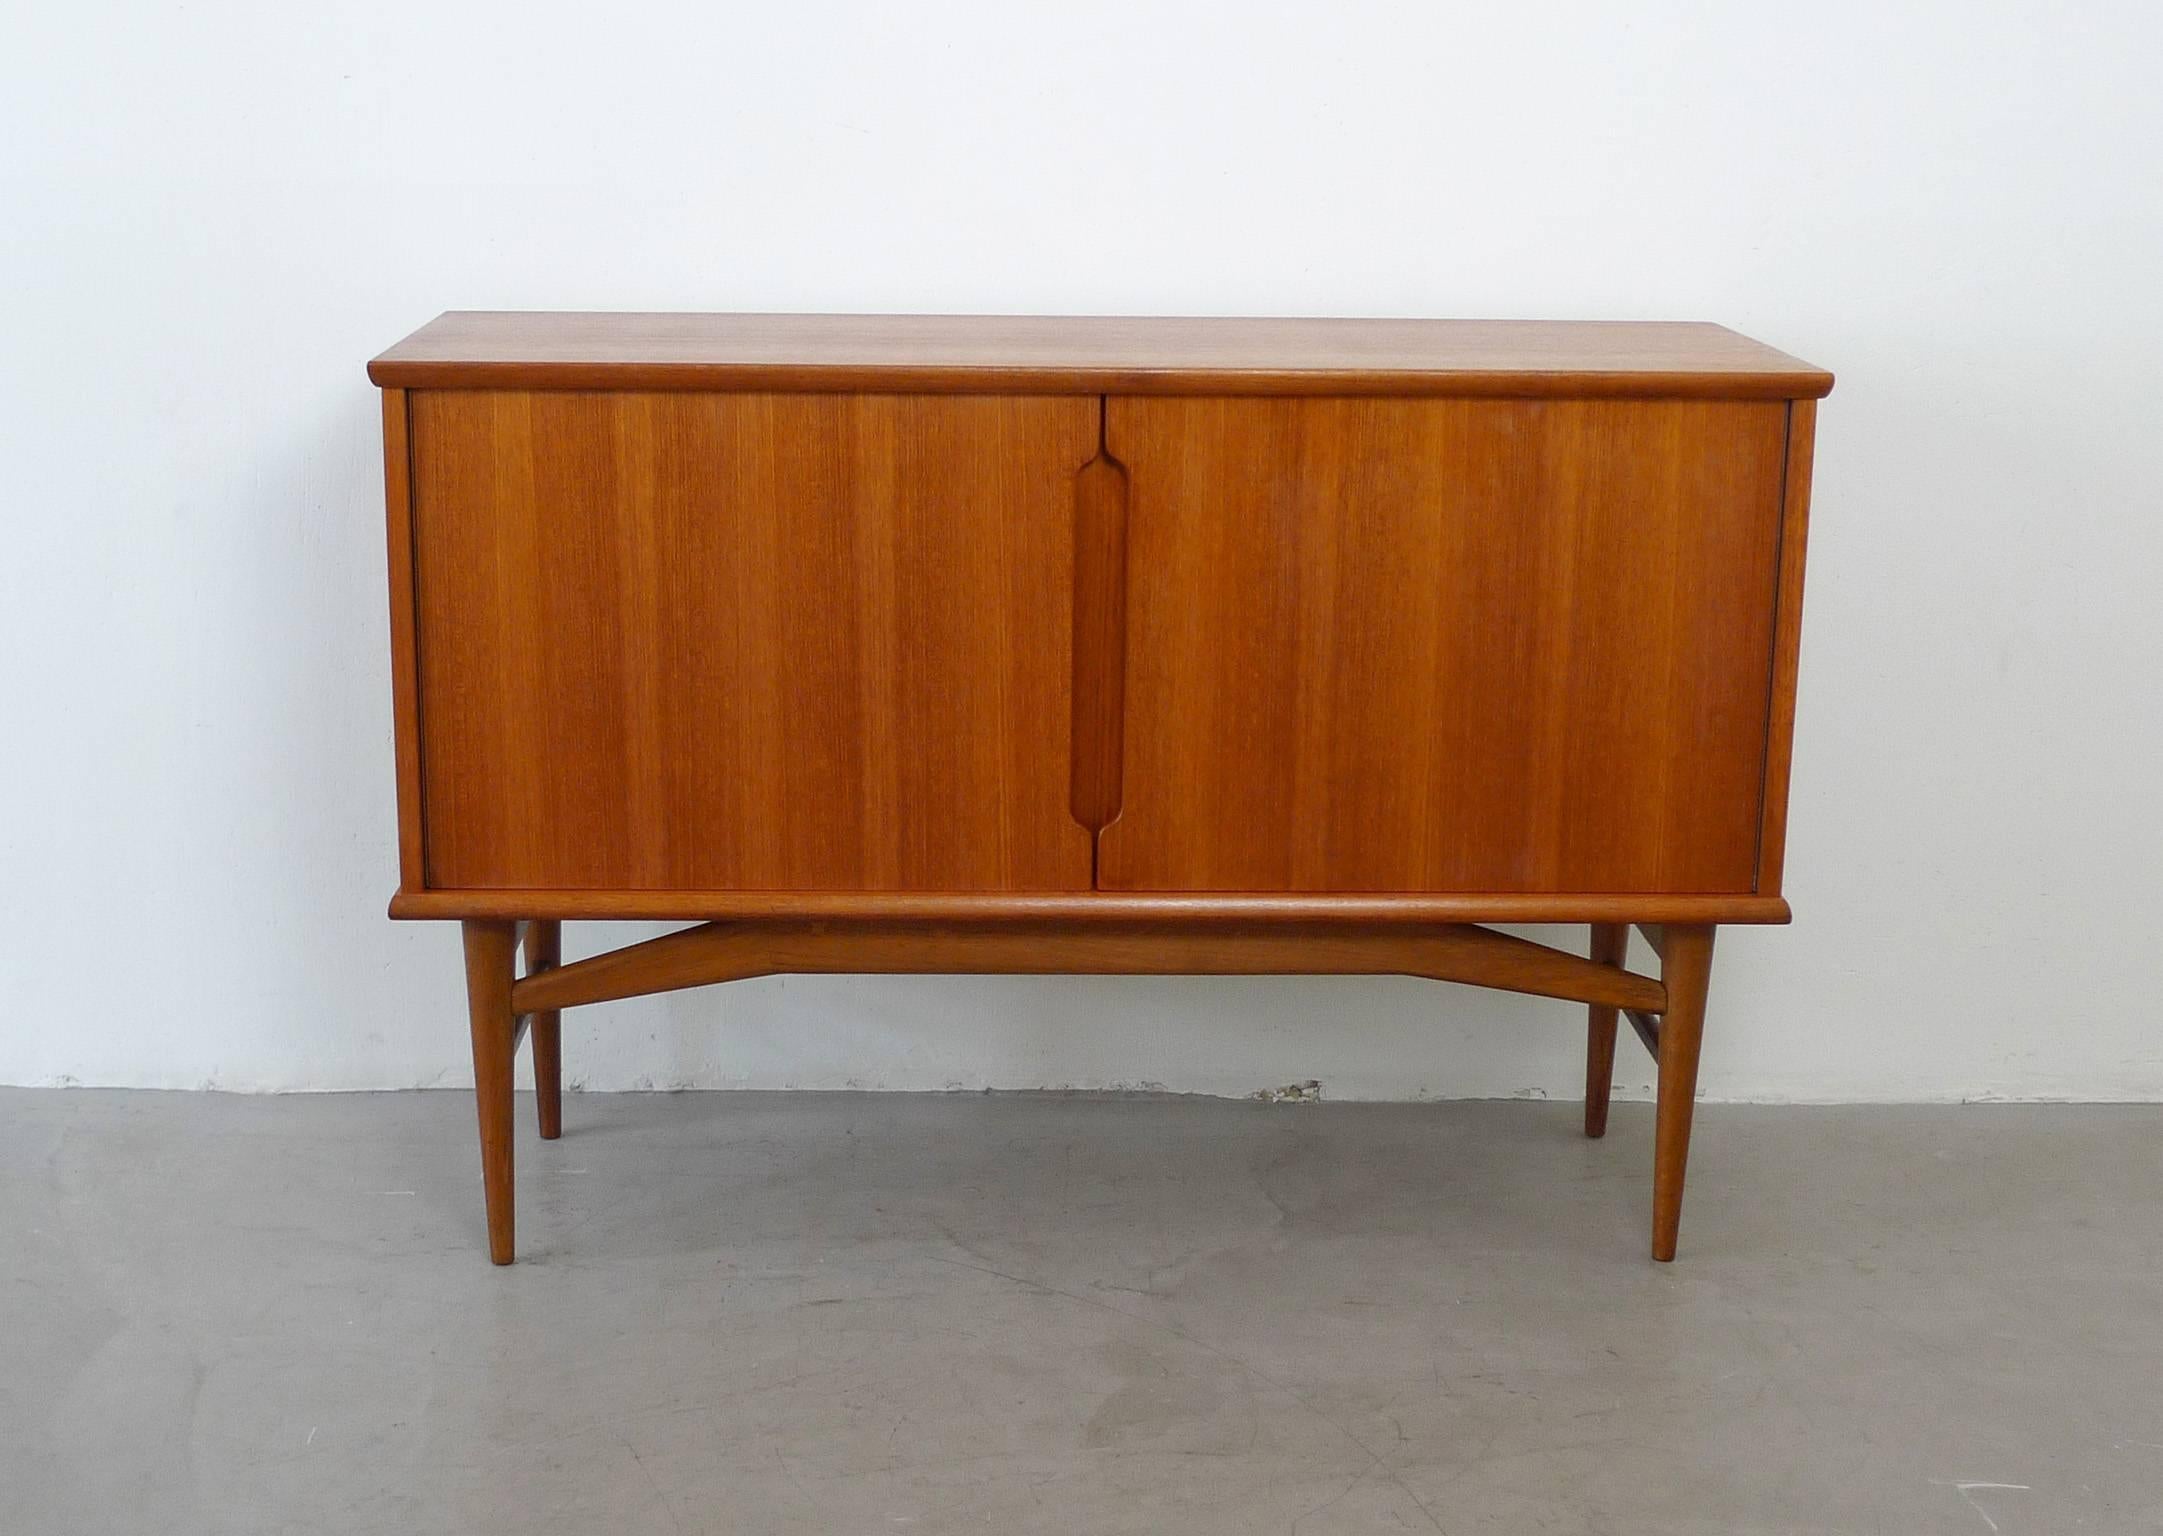 1950s teakwood sideboard from the Danish manufacturer Fredericia.
The sideboard has two trap doors with a shelve inside and beautiful constructed case legs.
It is in excellent condition.